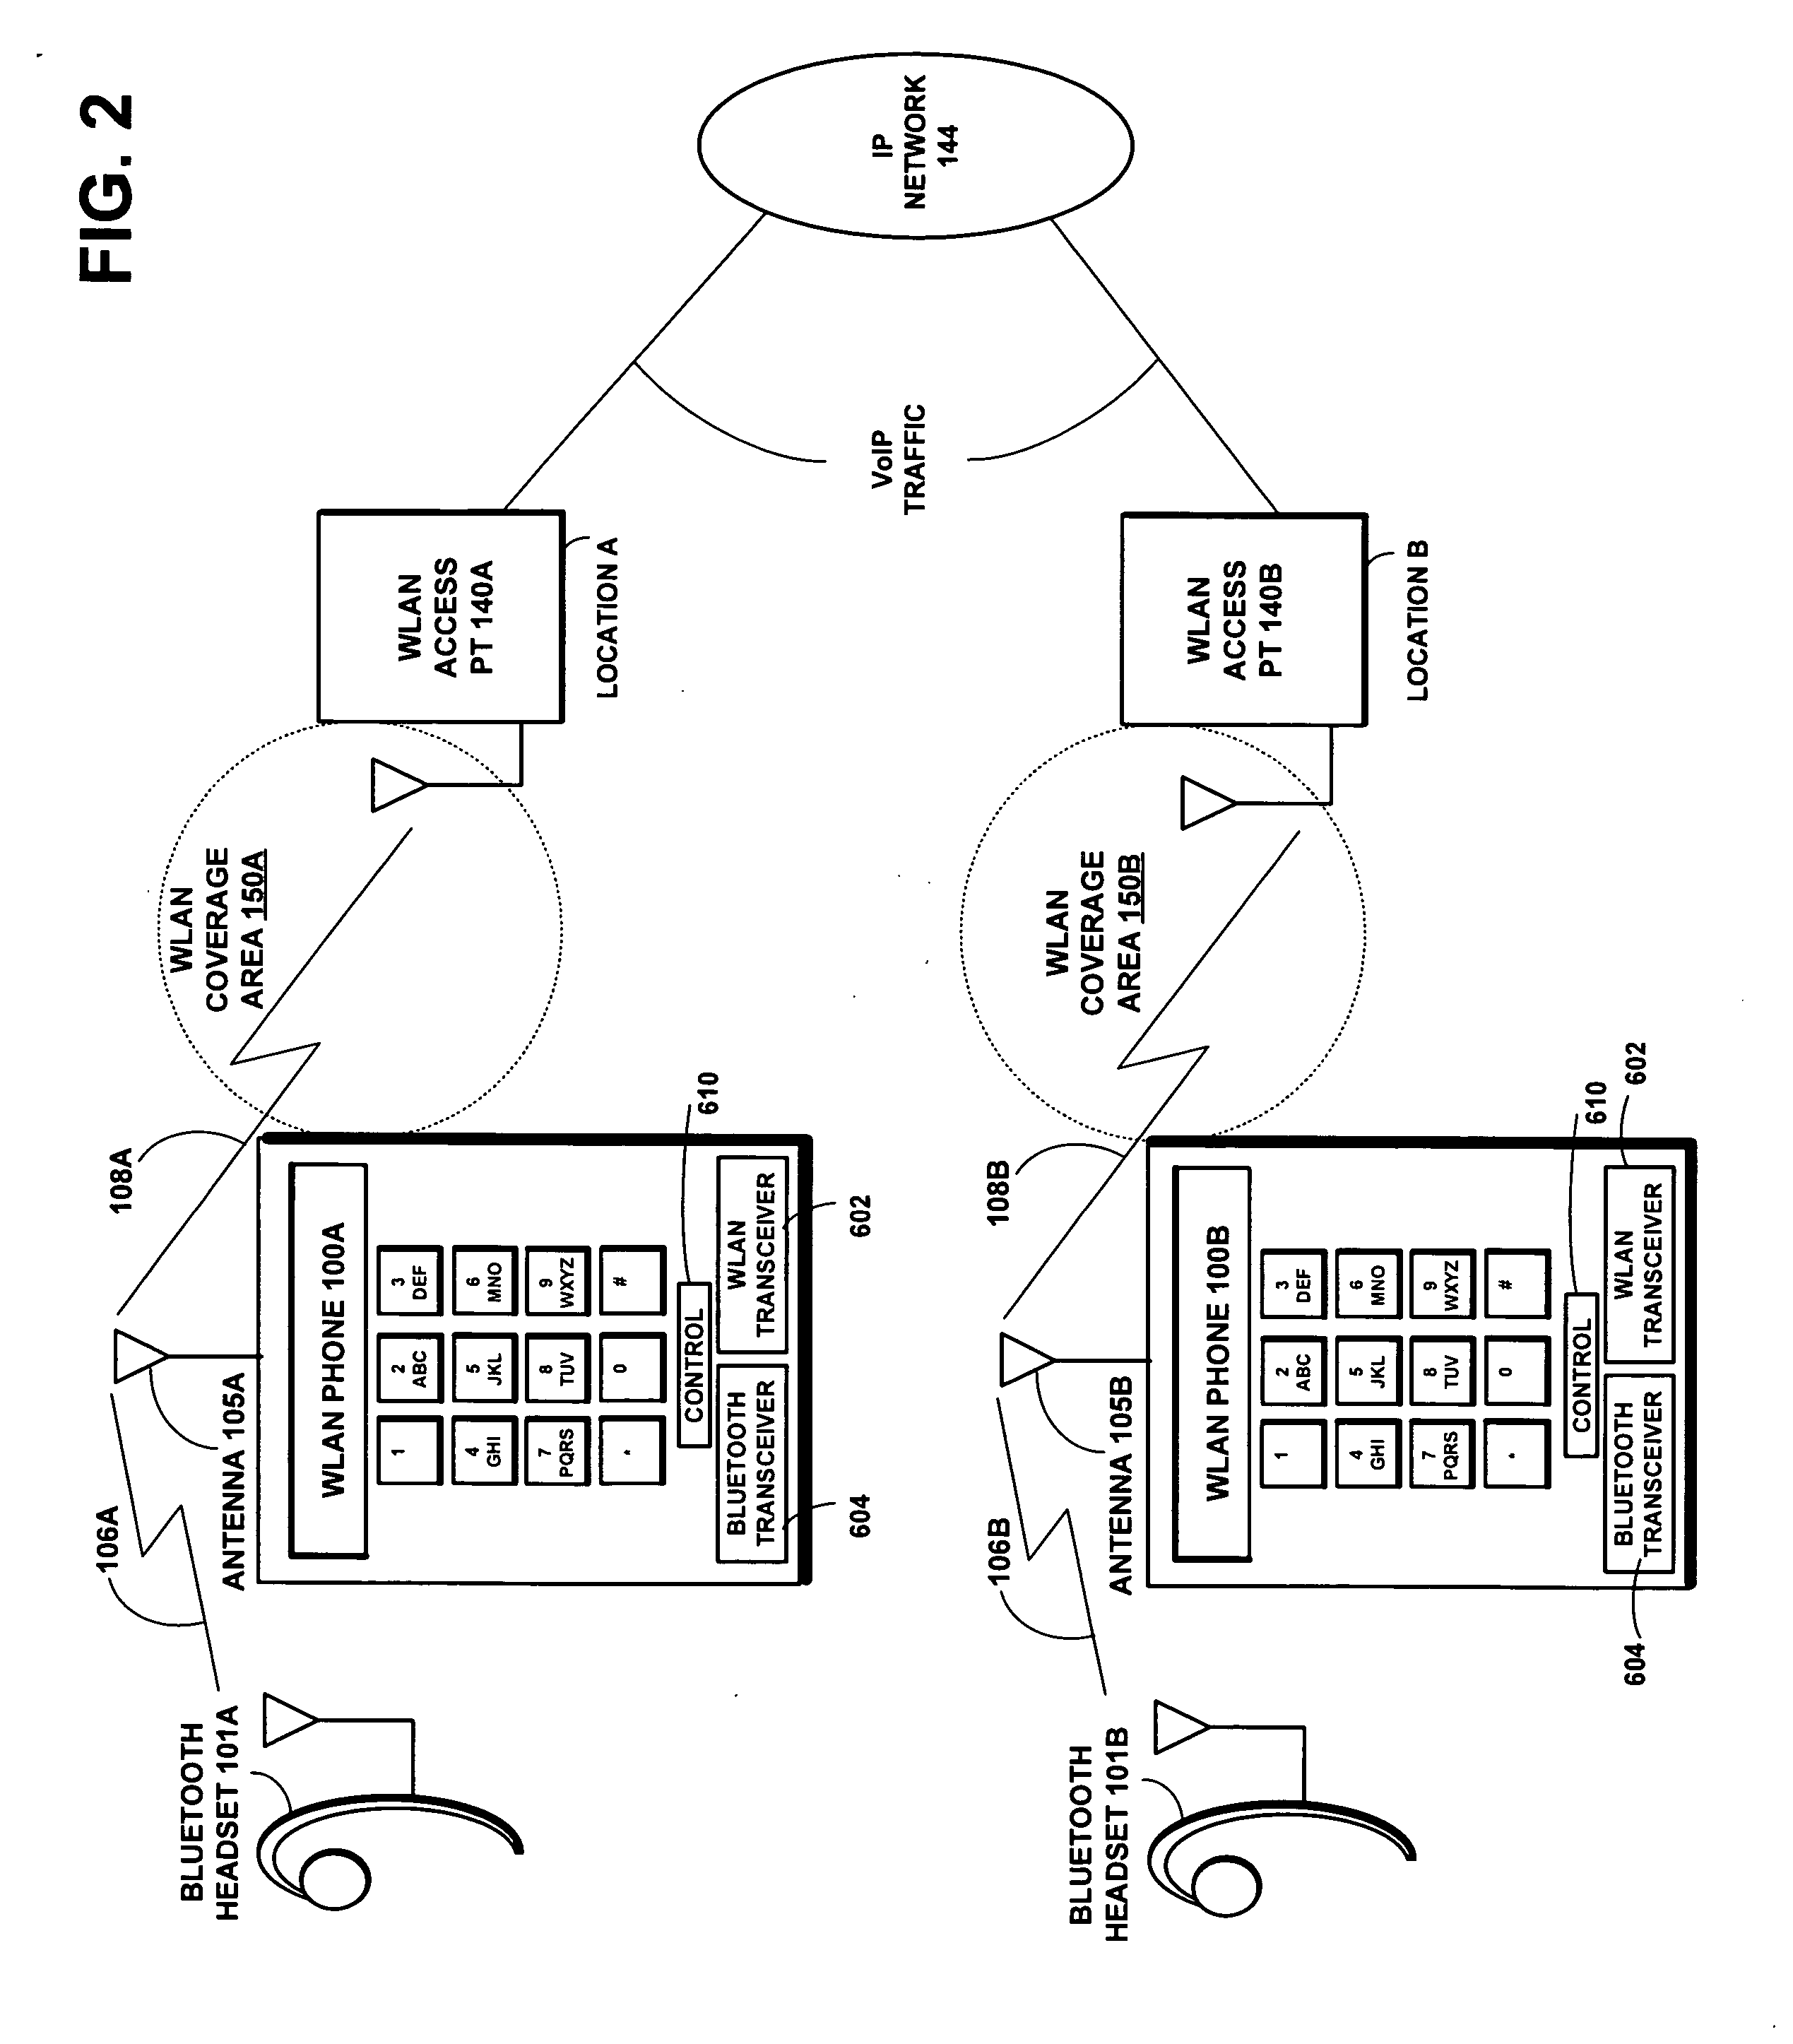 Method and system for VoIP over WLAN to bluetooth headset using advanced eSCO scheduling